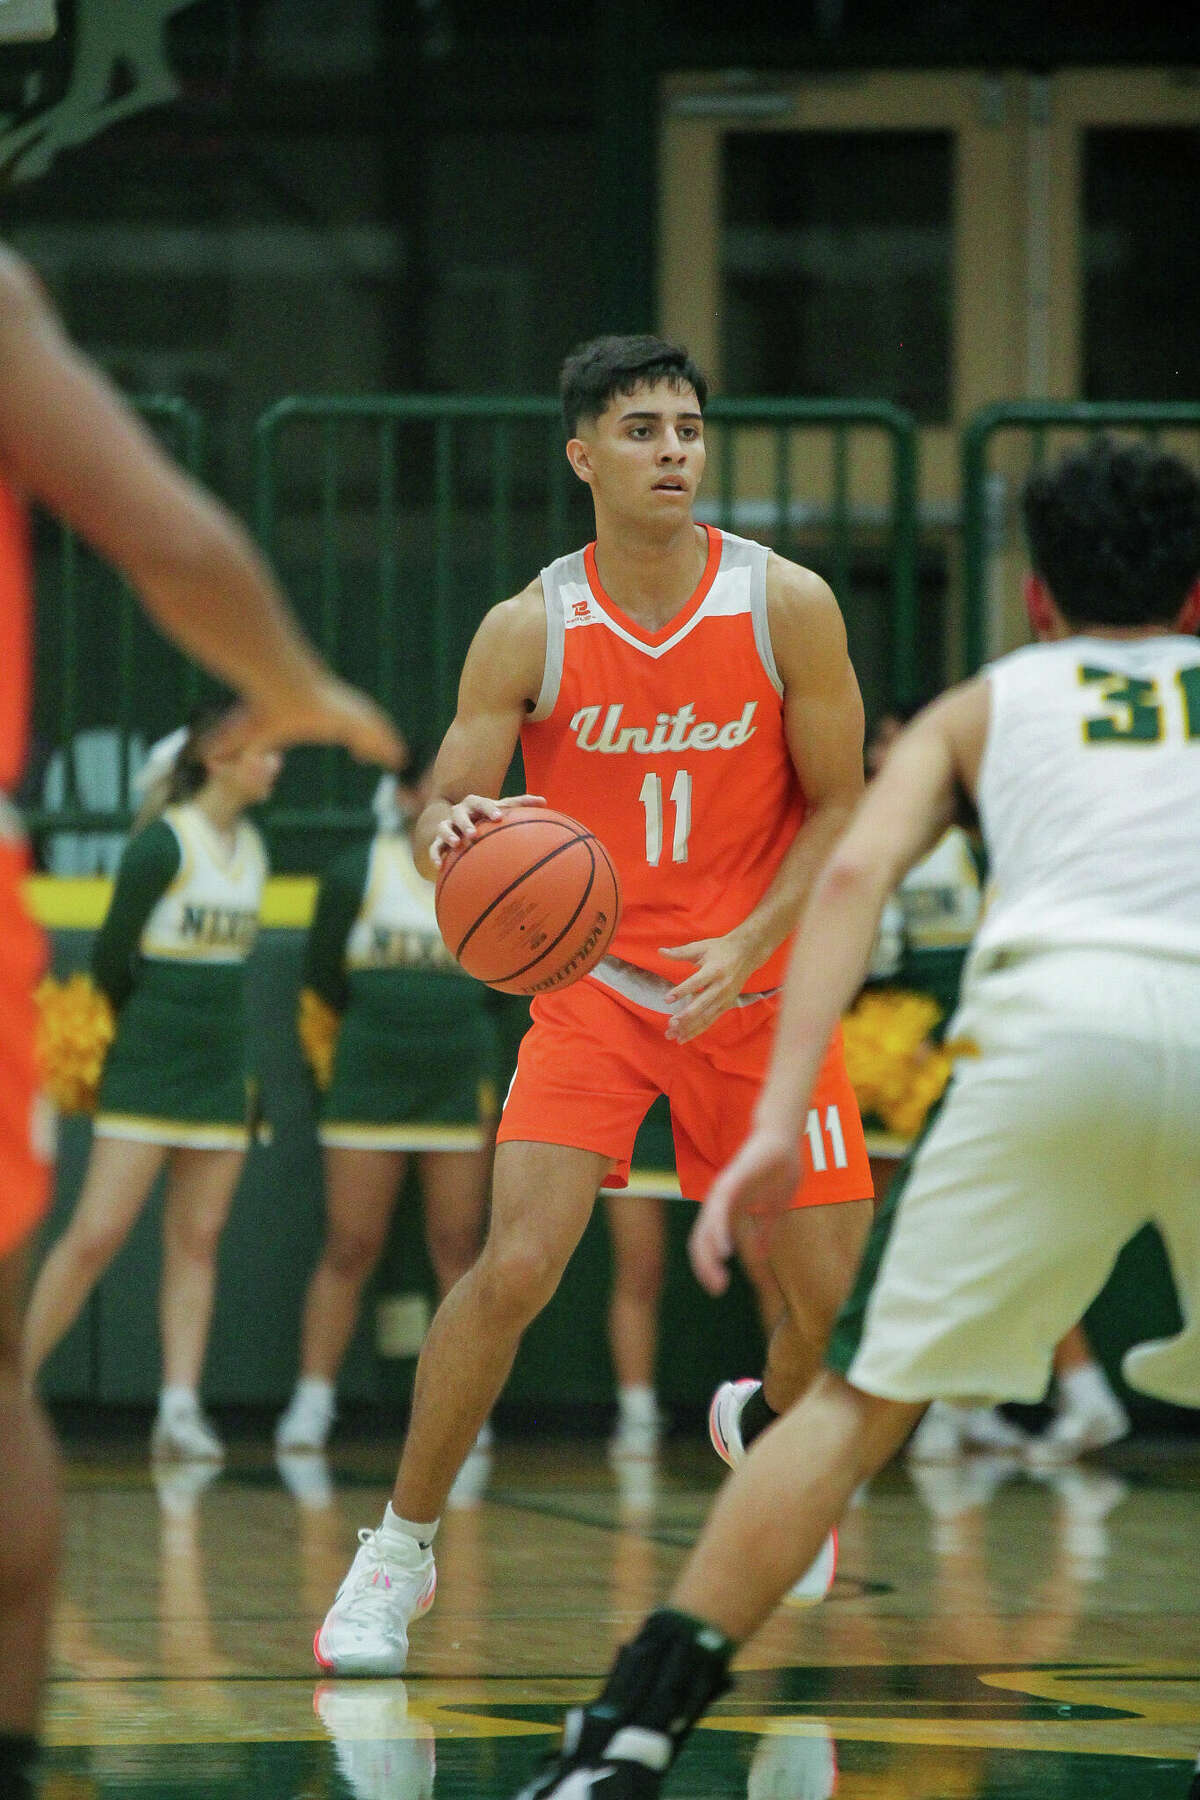 Luis Arzuaga and the United Longhorns performed well at a tournament in La Joya this past weekend.